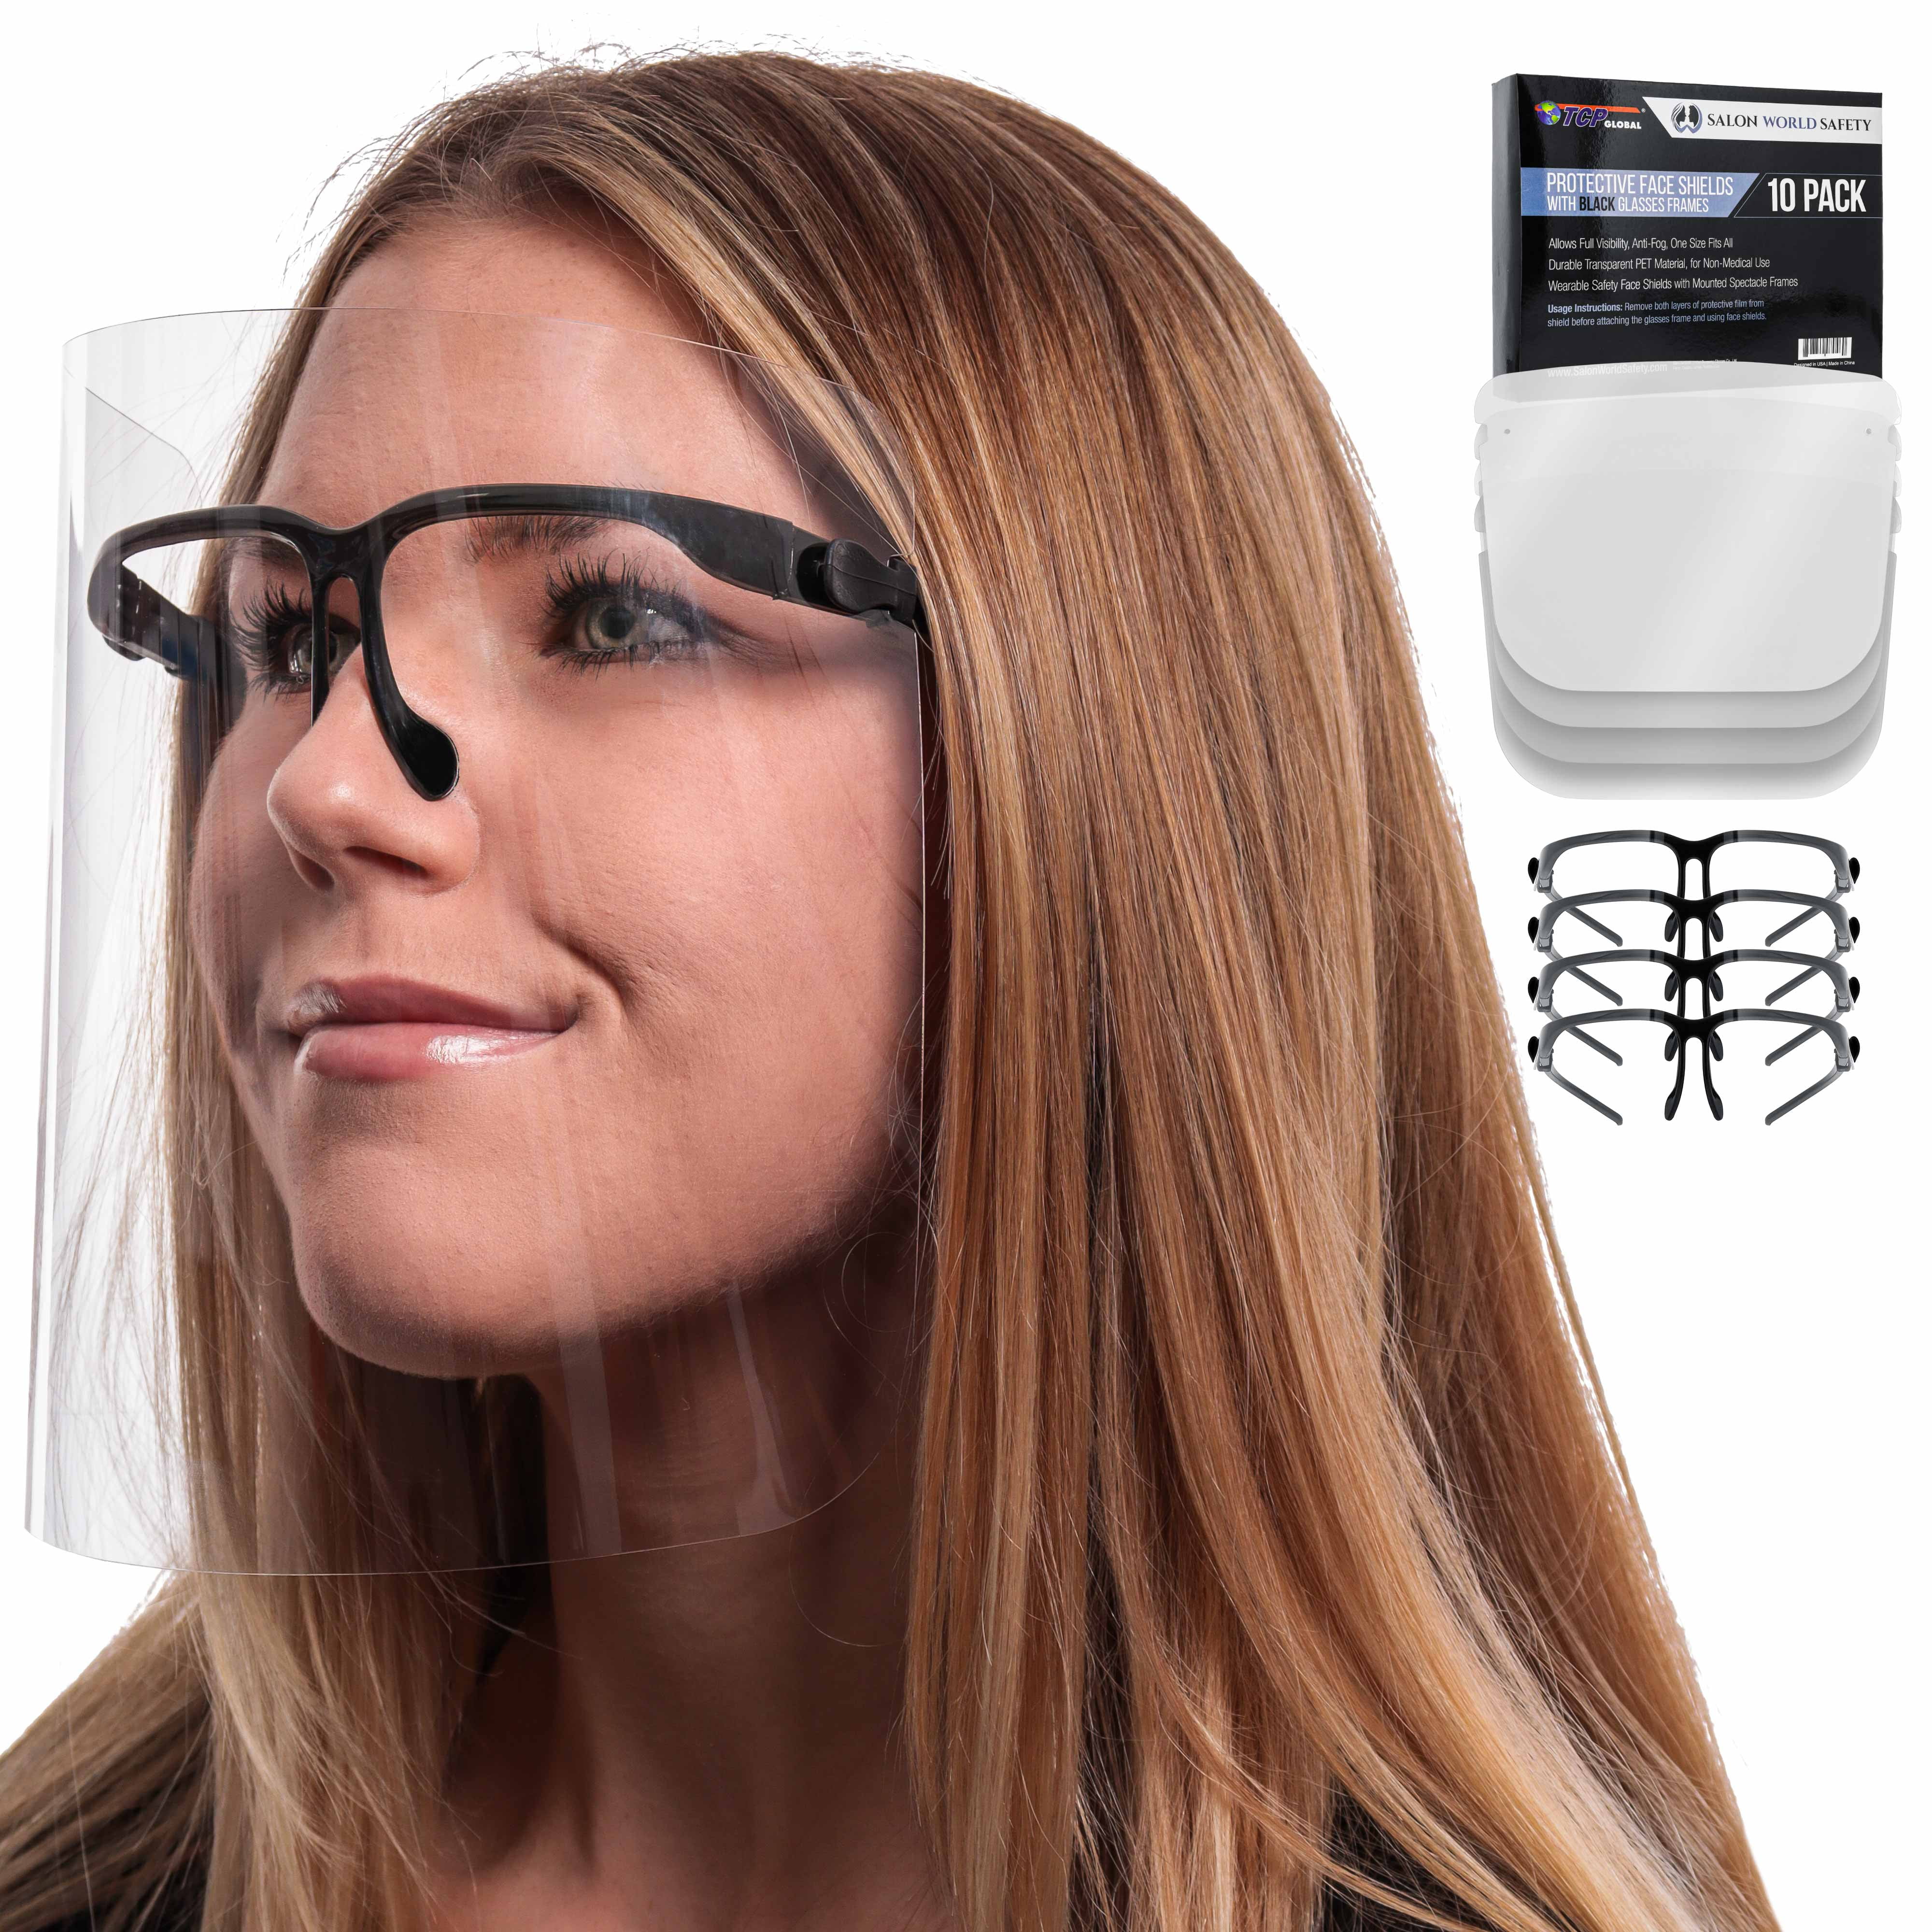 Premium 10 Pack Full Face Covering Anti-Fog Shield Clear Glasses Face Protector 